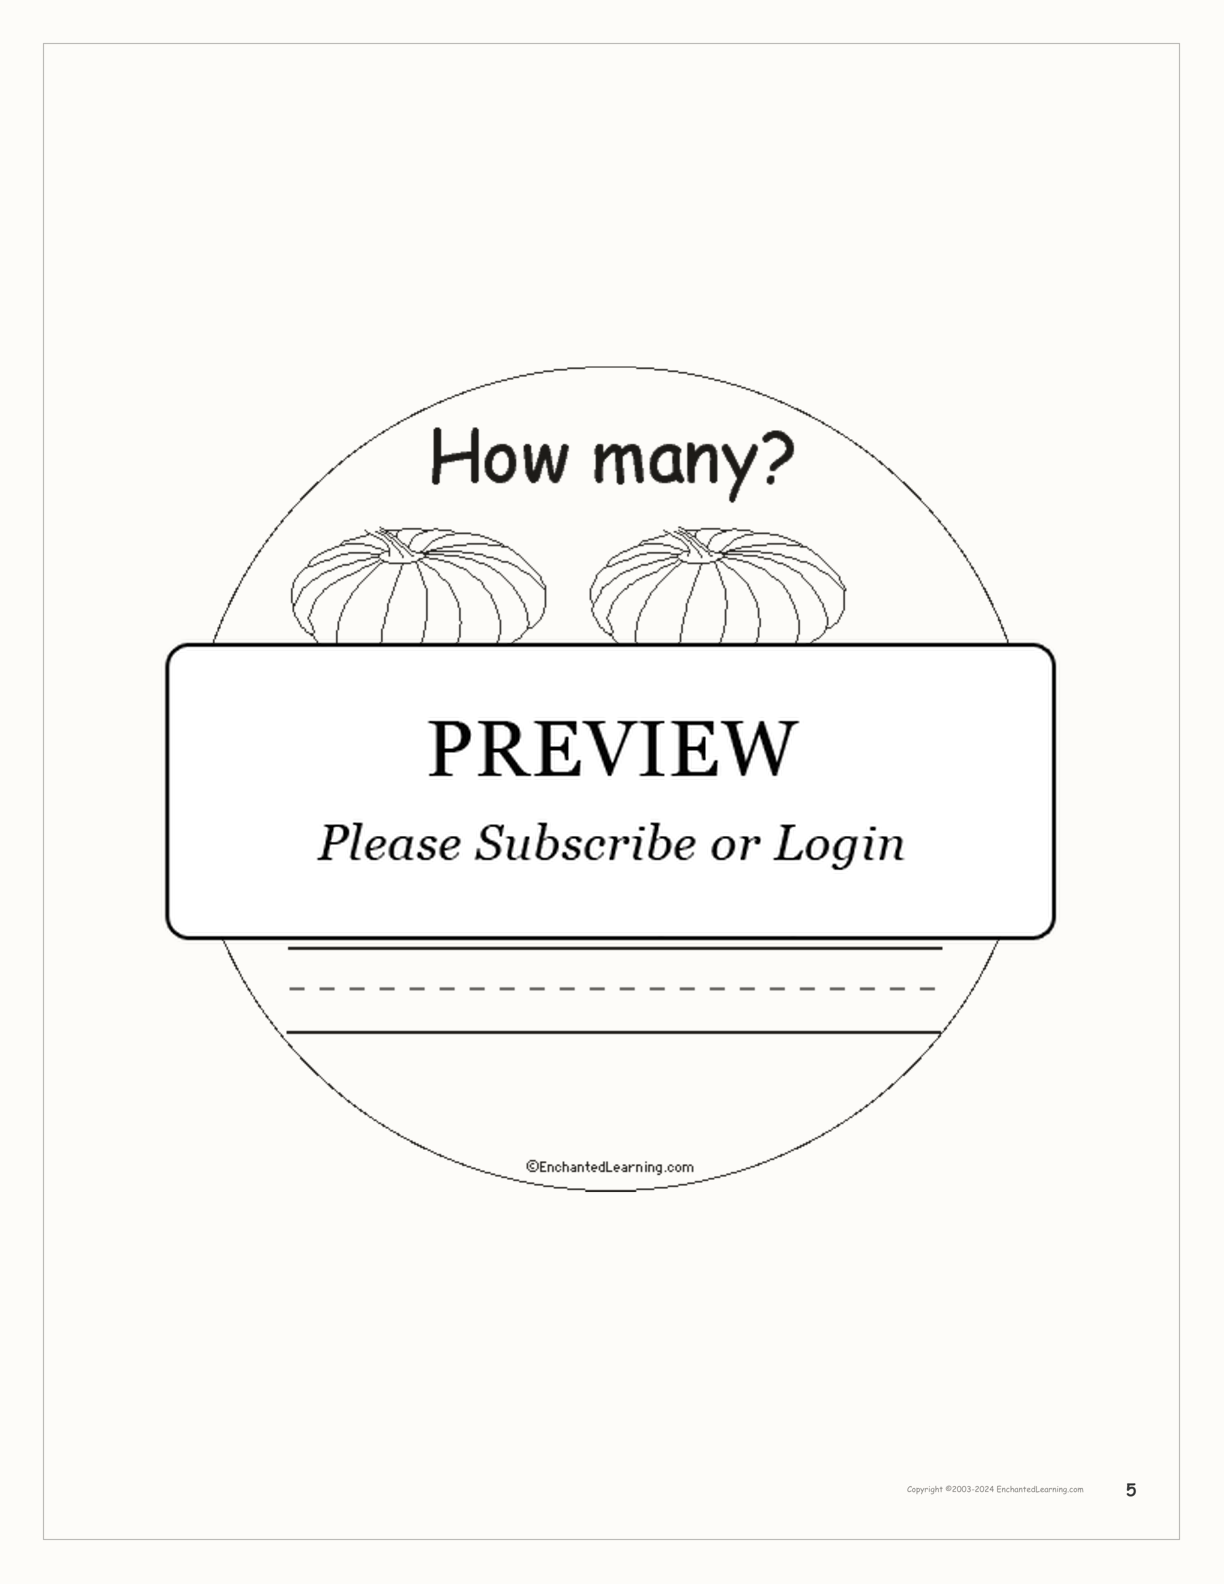 How Many Pumpkins? interactive printout page 5